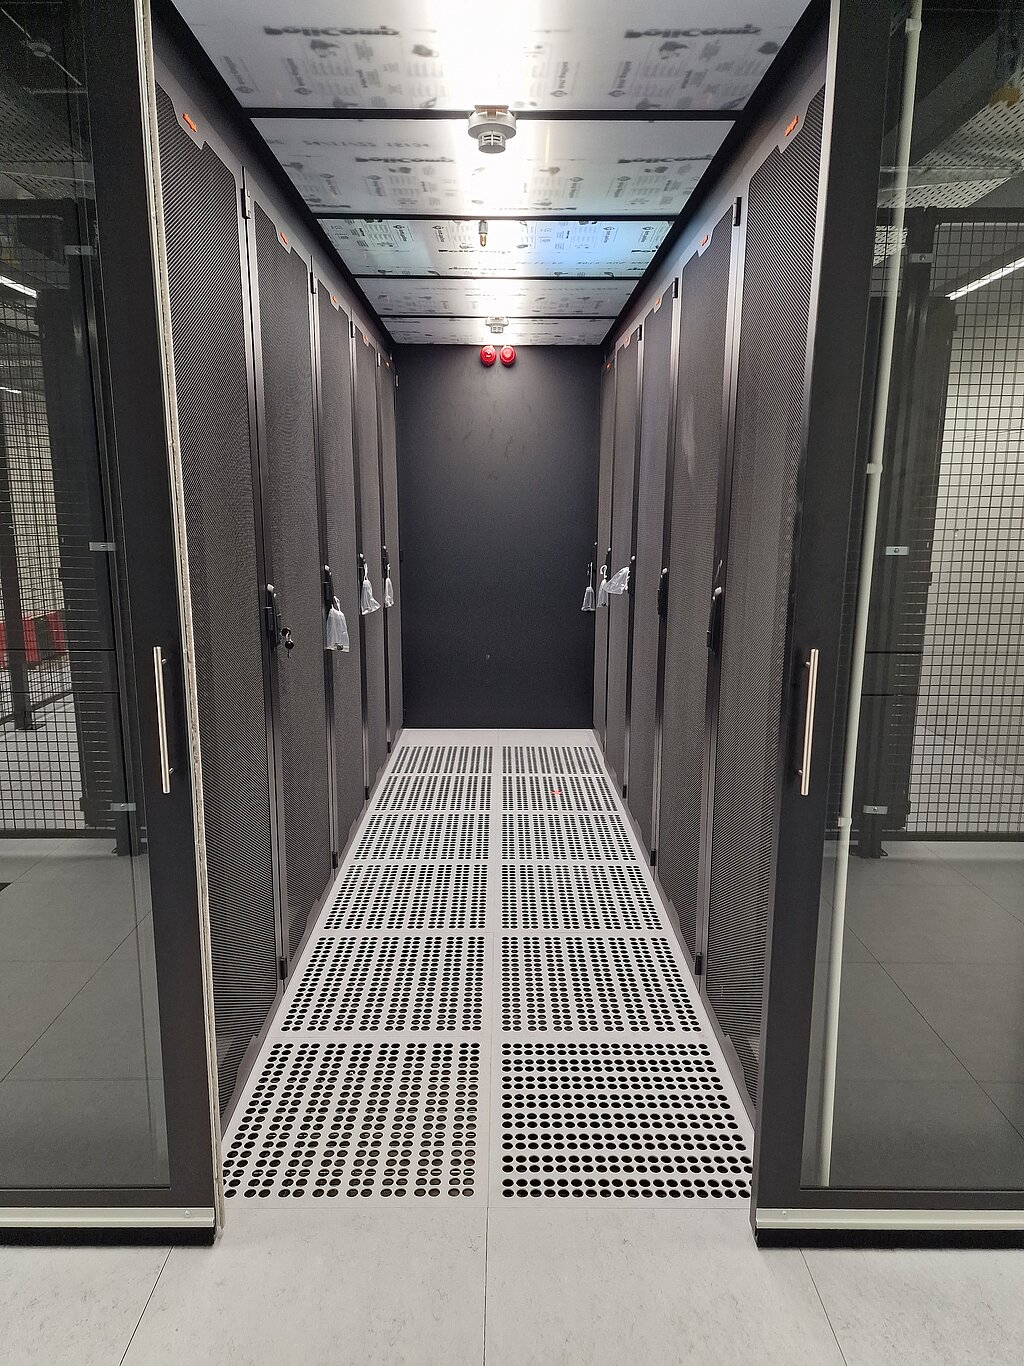 Cold aisle containment of the data center